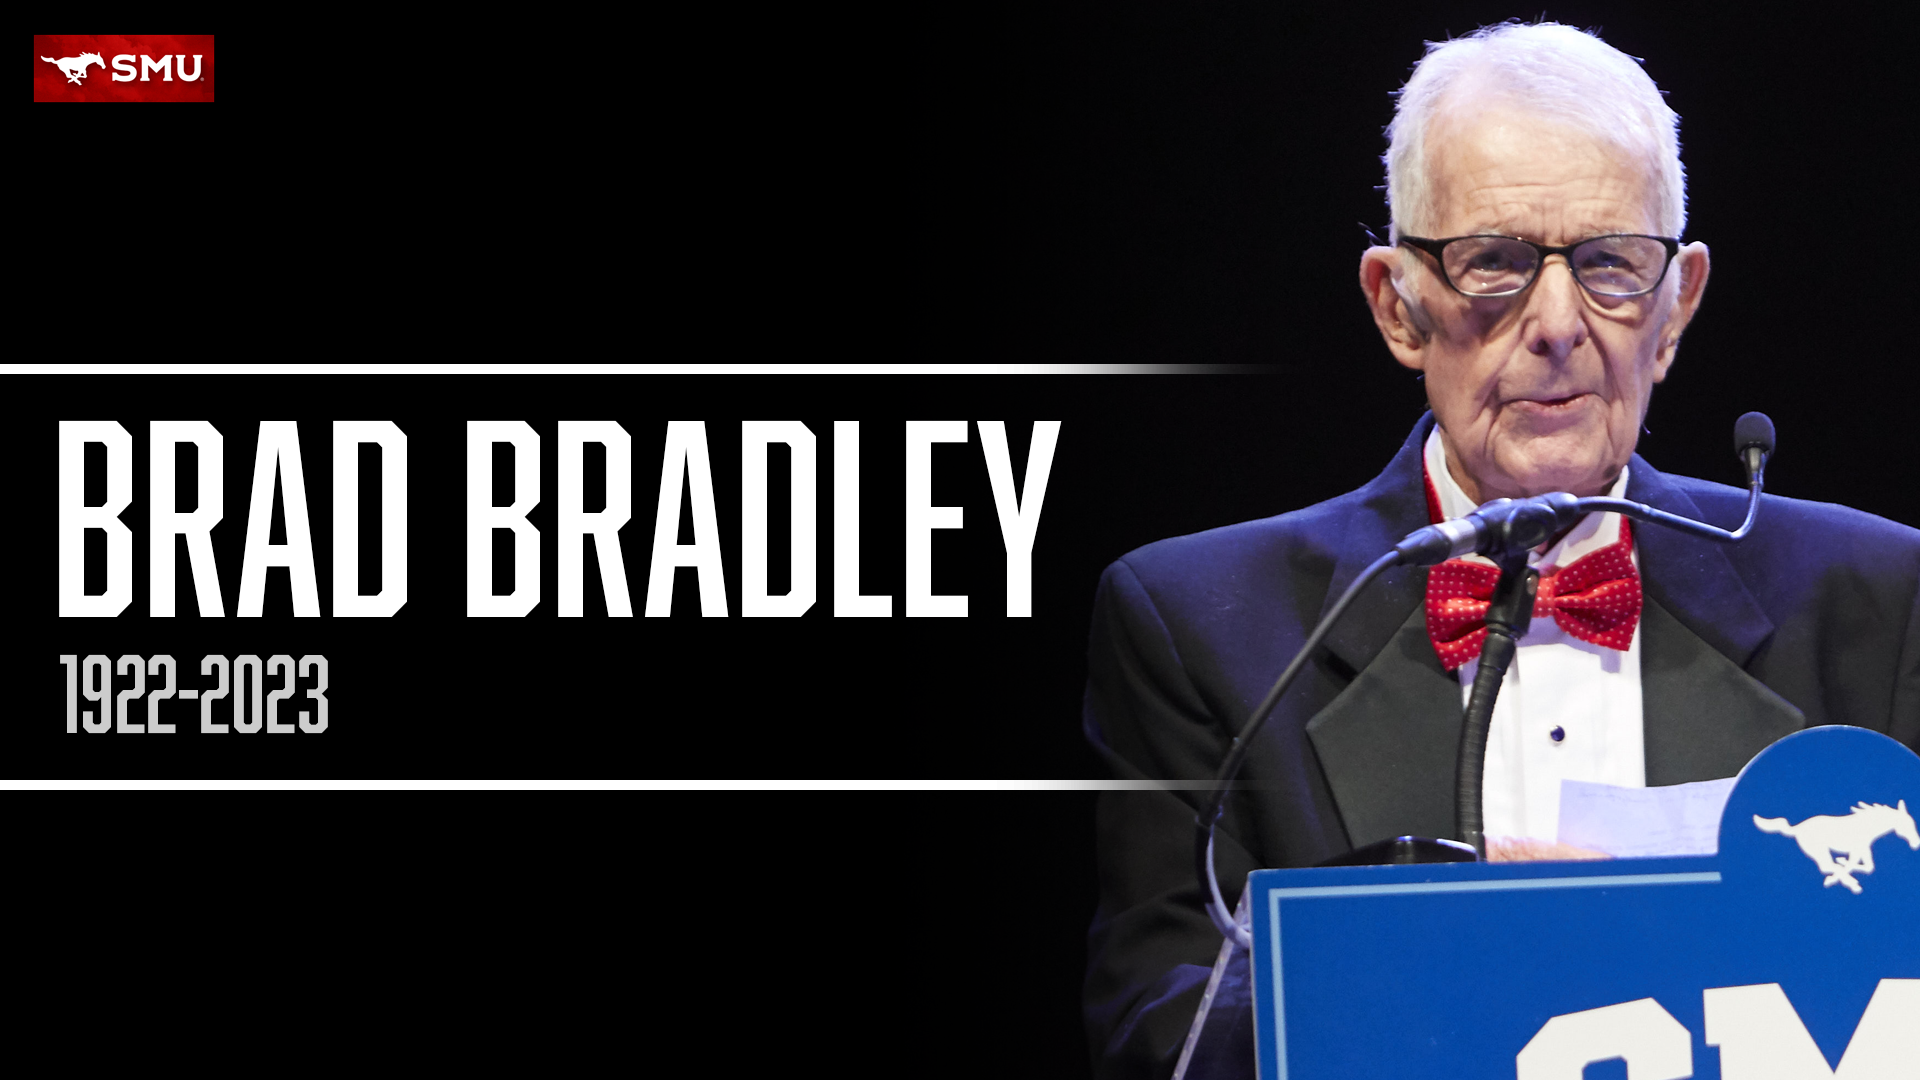 Bradley remembered as talented, kind